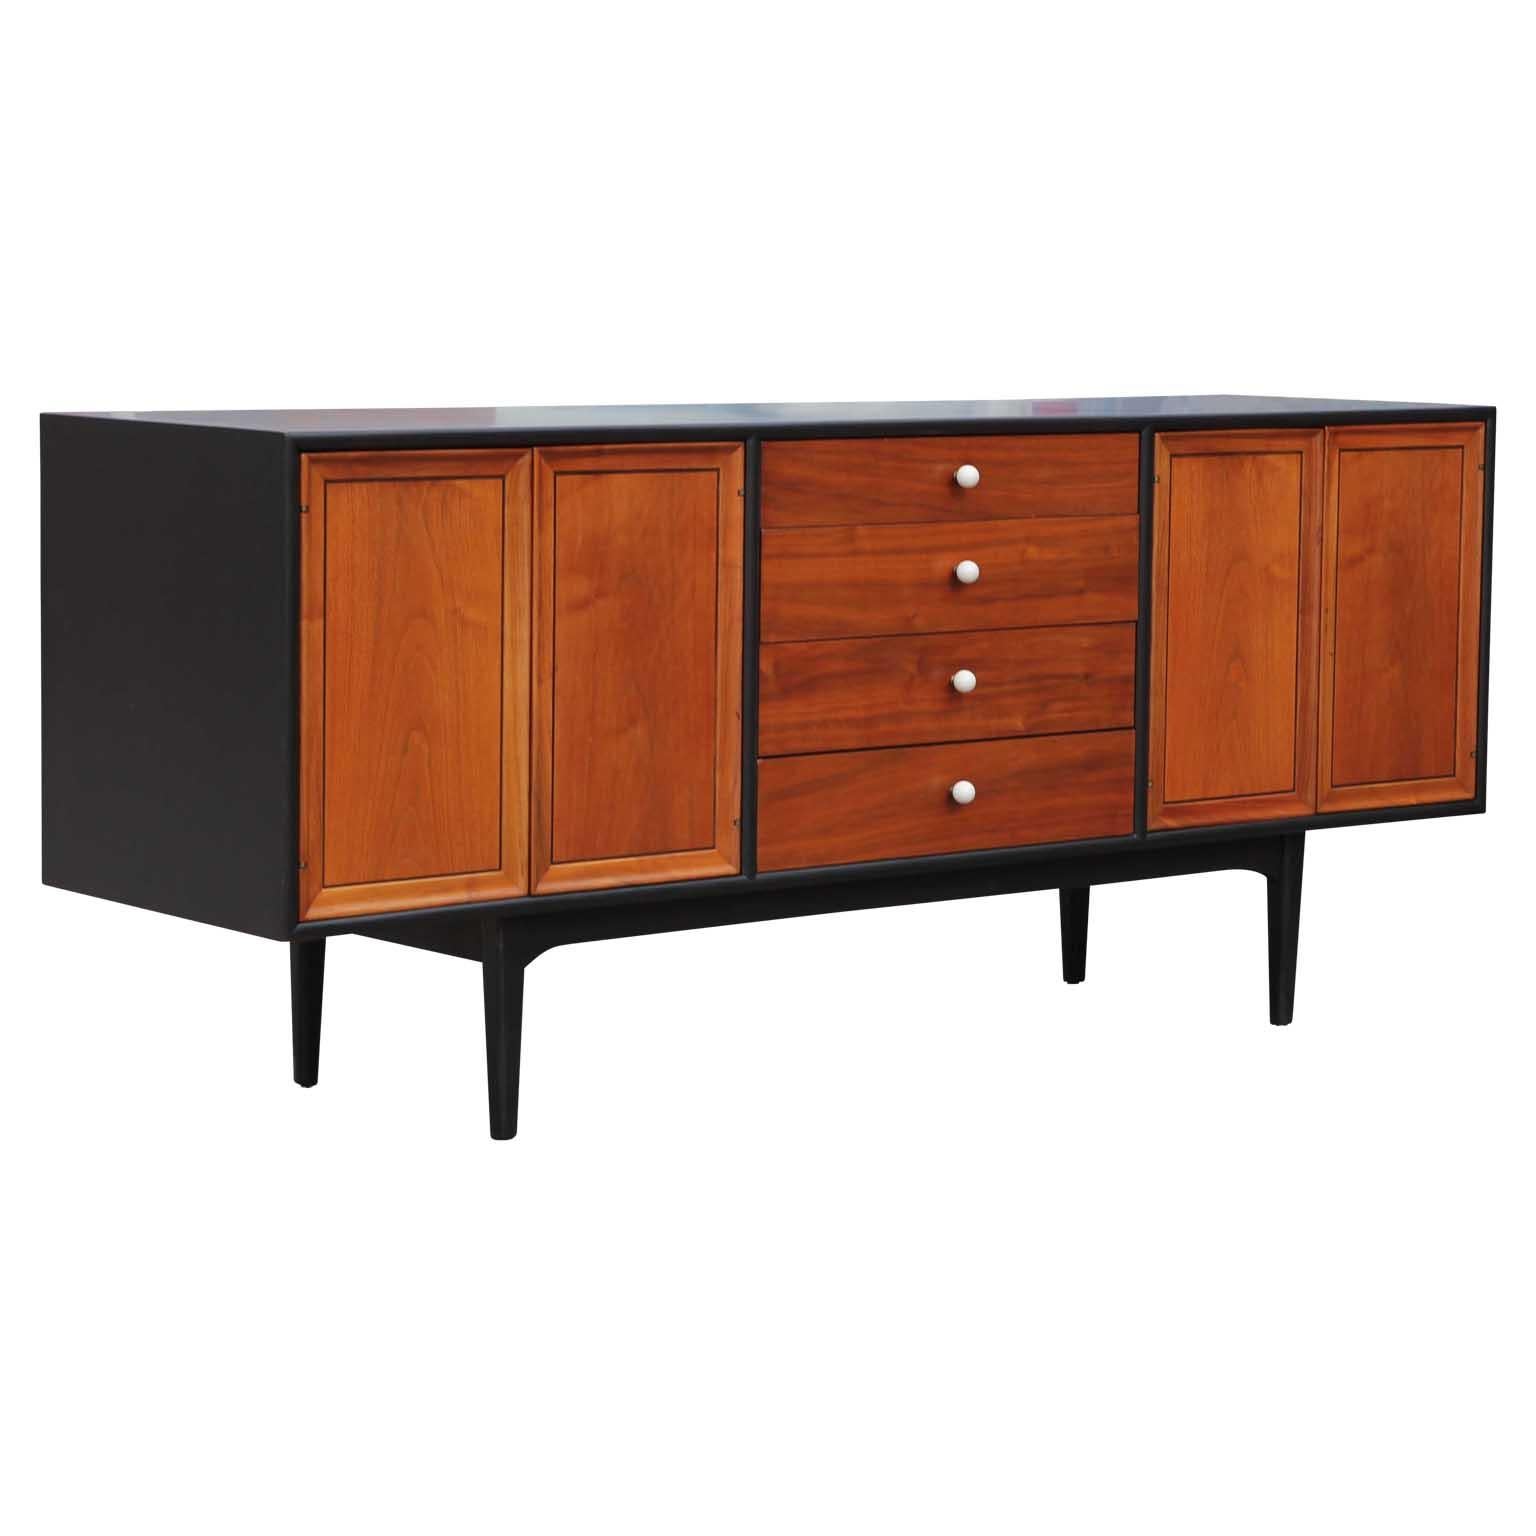 Midcentury Drexel declaration credenza by Kipp Stewart and Stewart McDougall featuring four center drawers accented by white porcelain pulls, with double door storage compartments on both sides has been customized with black and natural wood finish.